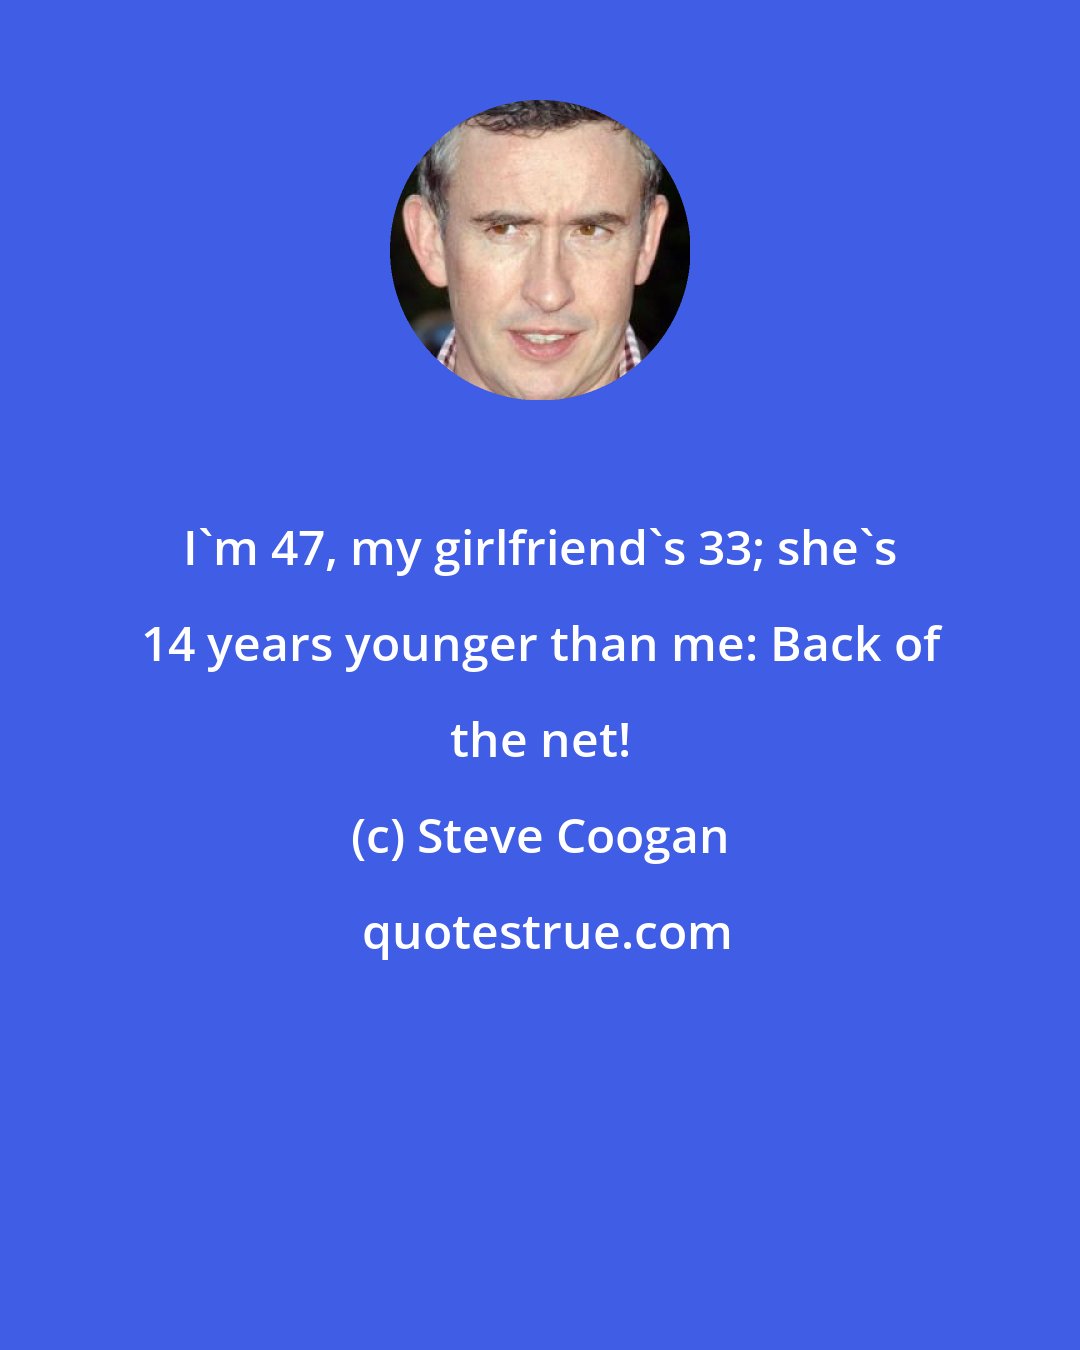 Steve Coogan: I'm 47, my girlfriend's 33; she's 14 years younger than me: Back of the net!